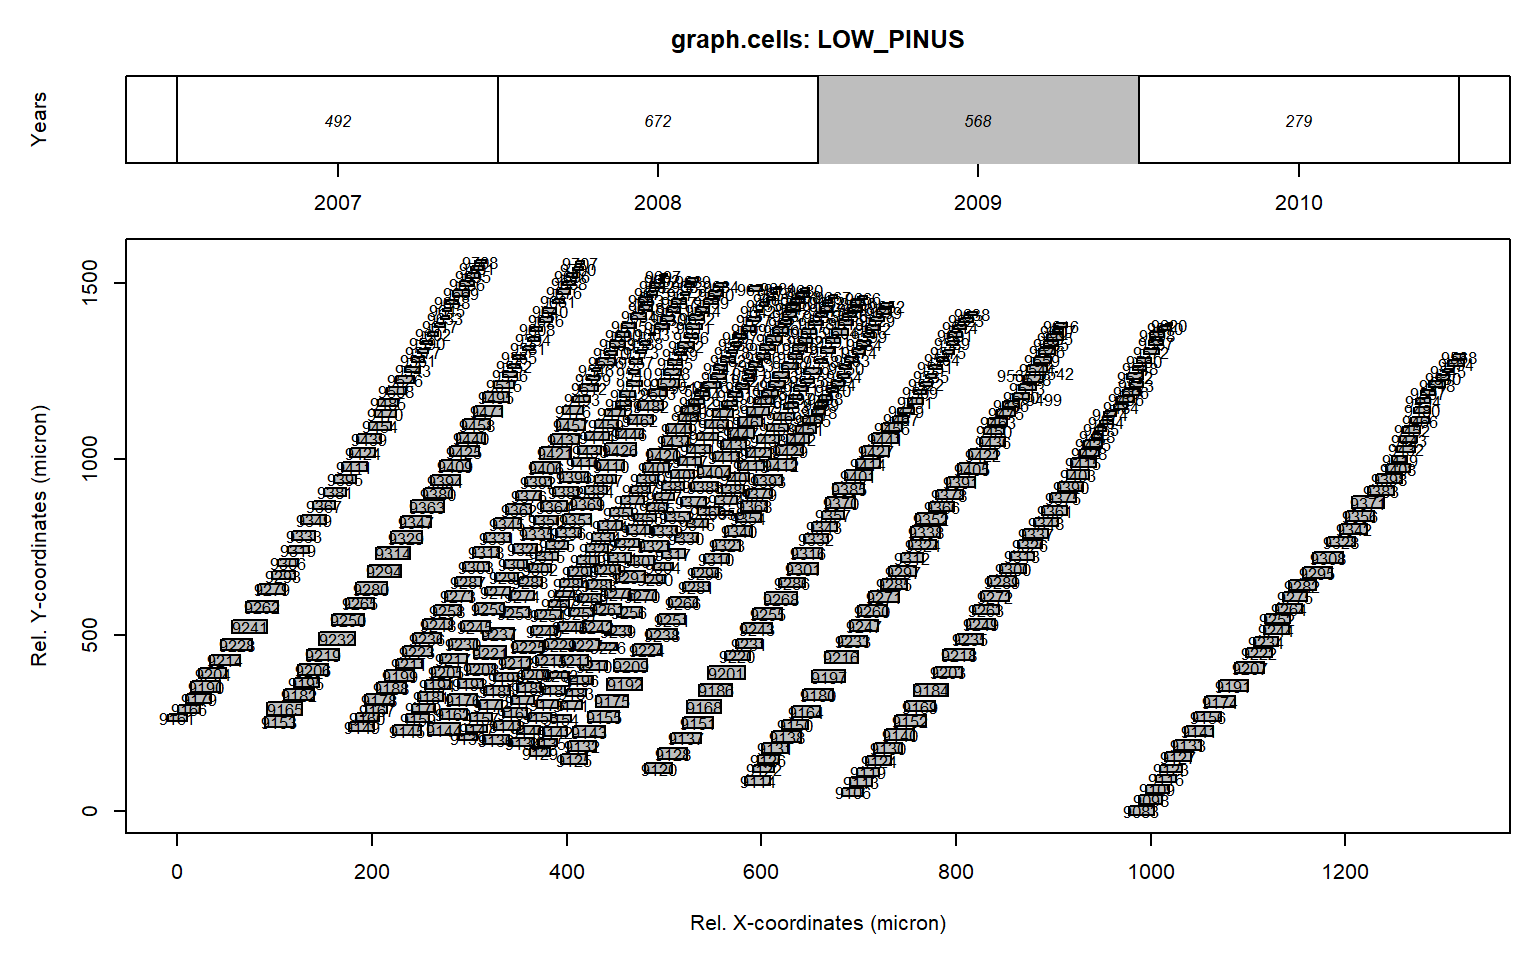 Graphical representation of anatomical data presented with the function graph.cells() for the ring 2007 from the LOW_PINUS example. The upper panel indicates the calendar year for each ring and its total number of cells. The lower panel provides the positional data and the lumen area of each tracheid (size of the square) for the grey coloured annual ring shown in the upper panel. When plotting in R the number within the rectangle provides the cell identifier.